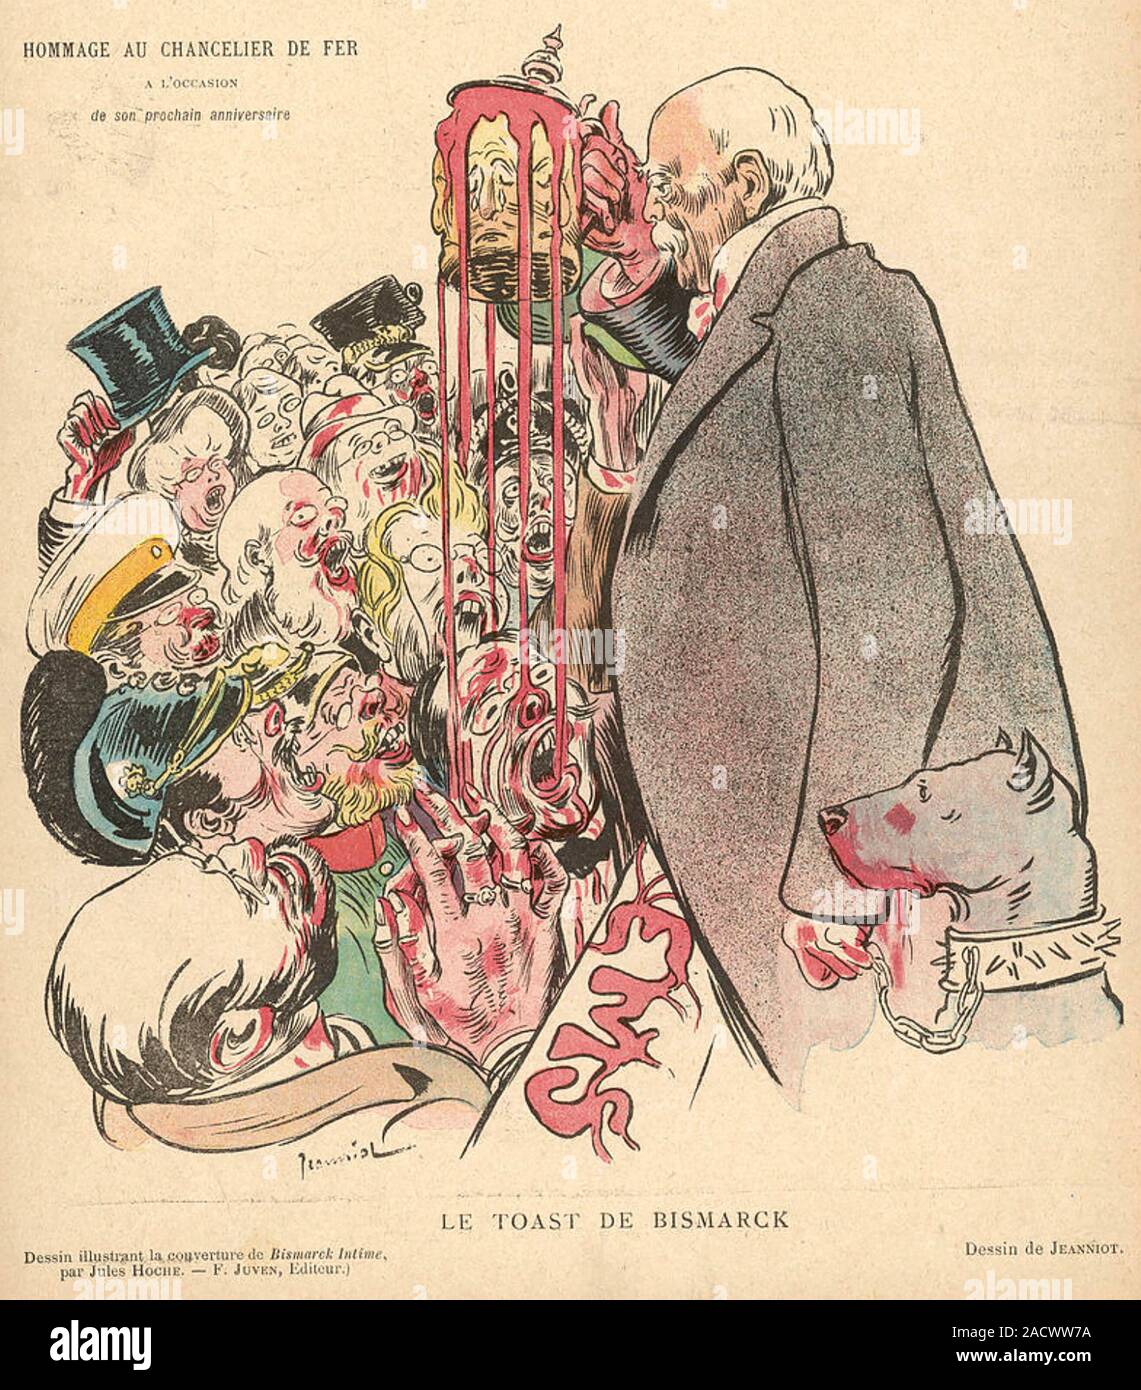 OTTO von BISMARCK (1815-1898) Prussian statesman in a French cartoon captioned The Toast of Bismarck - Hommage to the Iron Chancellor on the occasion of his next birthday. Published 1898. Stock Photo